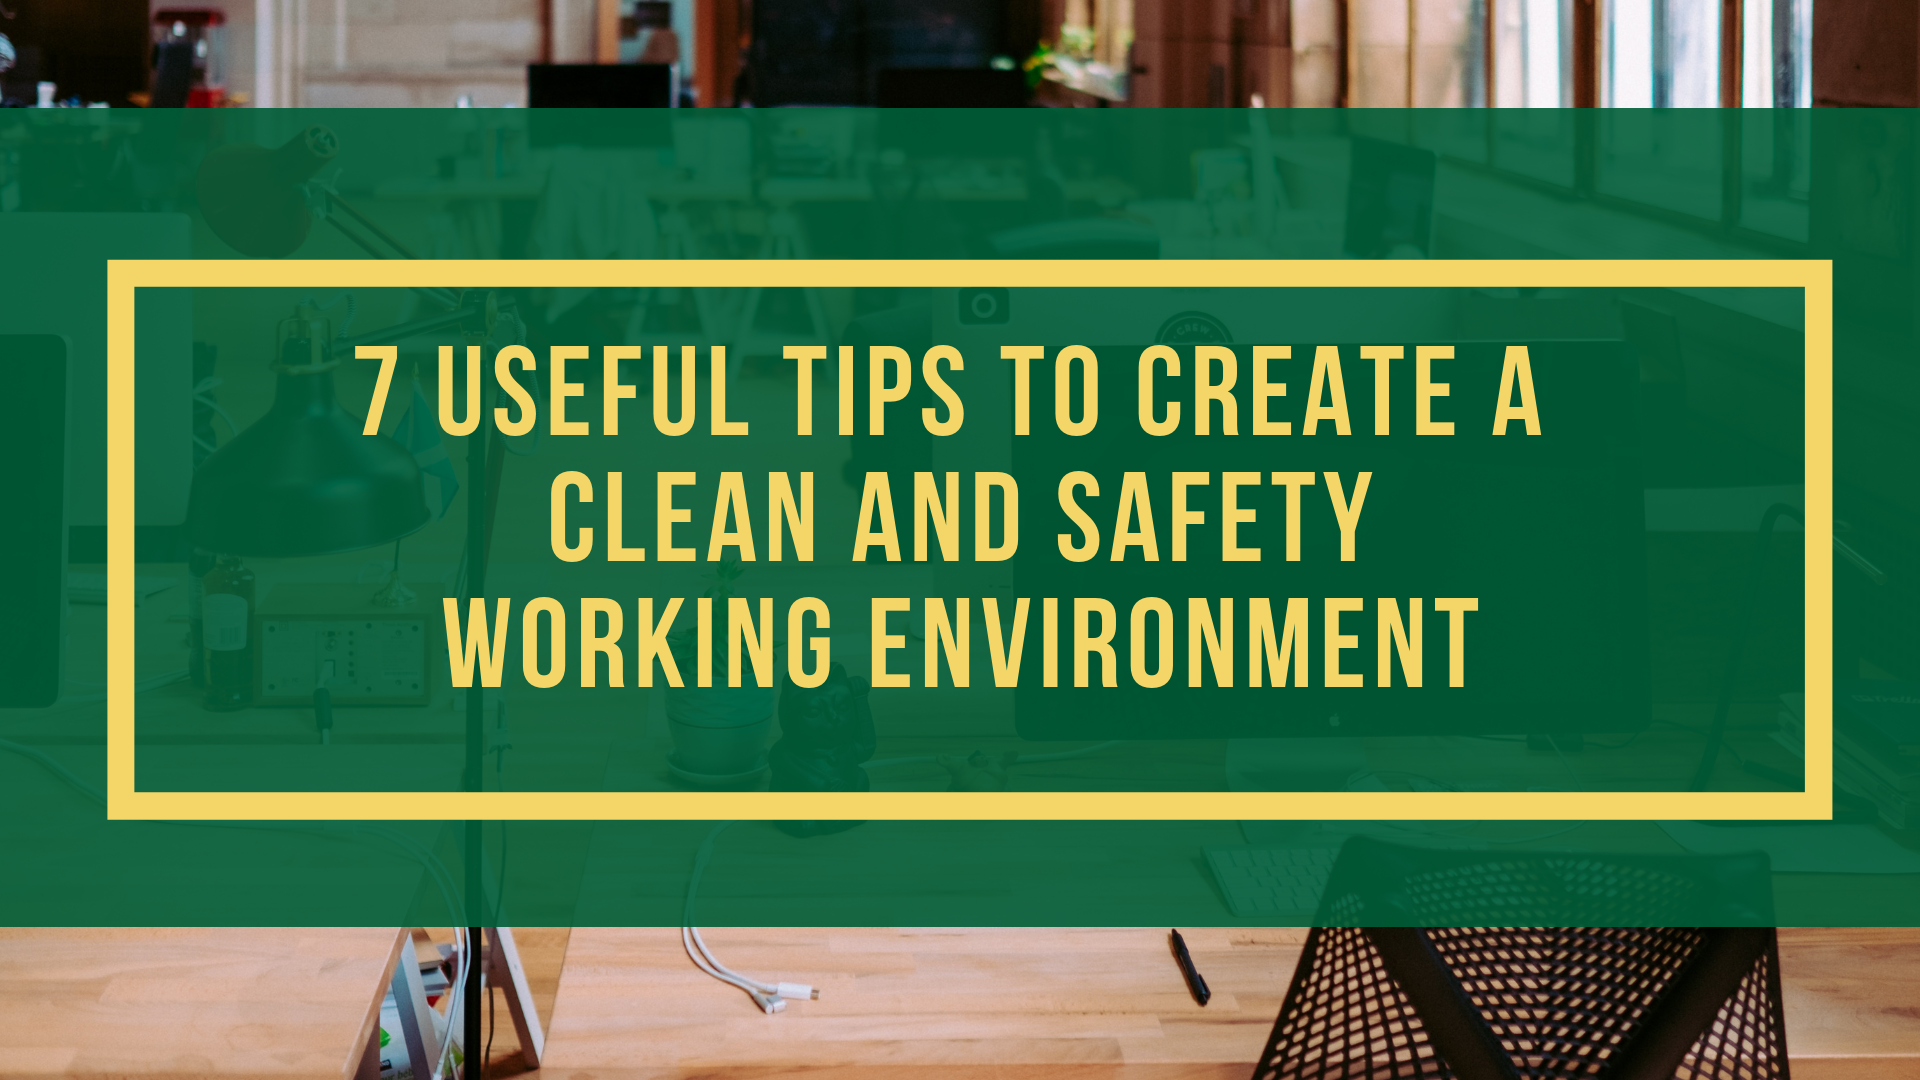 7 Useful Tips to Create A Clean and Safety Working Environment